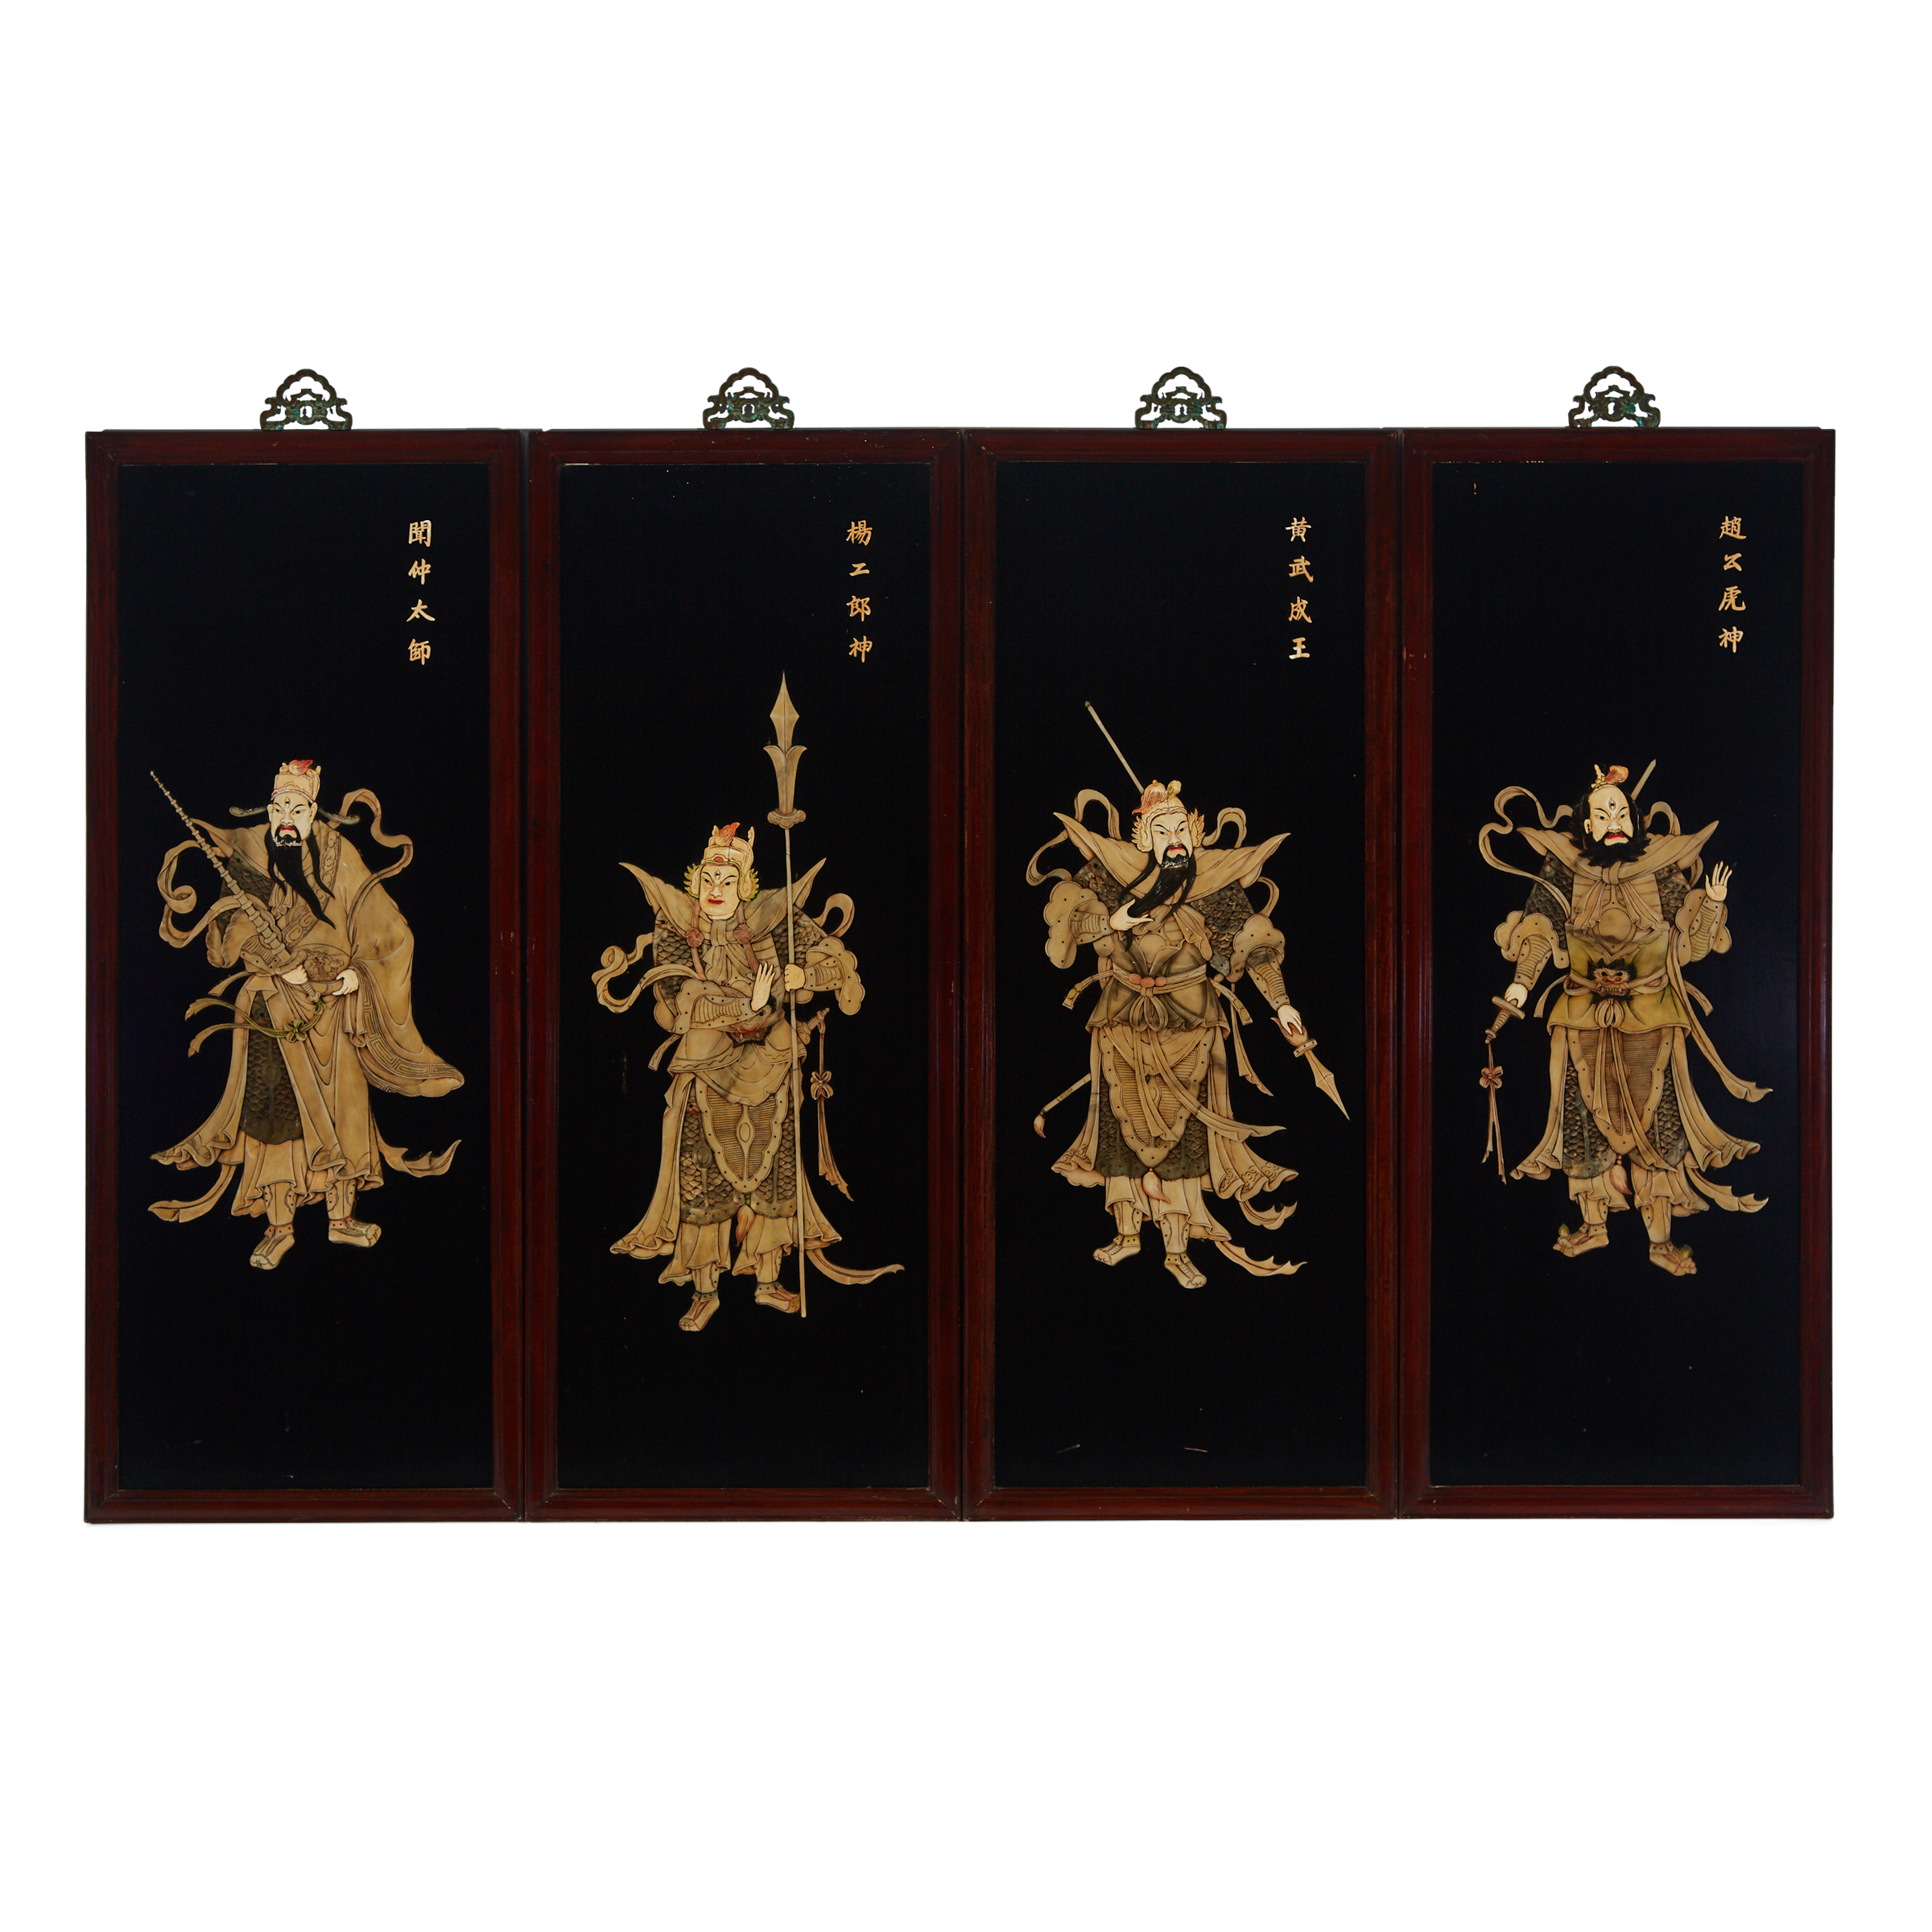 A Set of Four Ivory and Bone Inlaid Panels Mid-20th Century